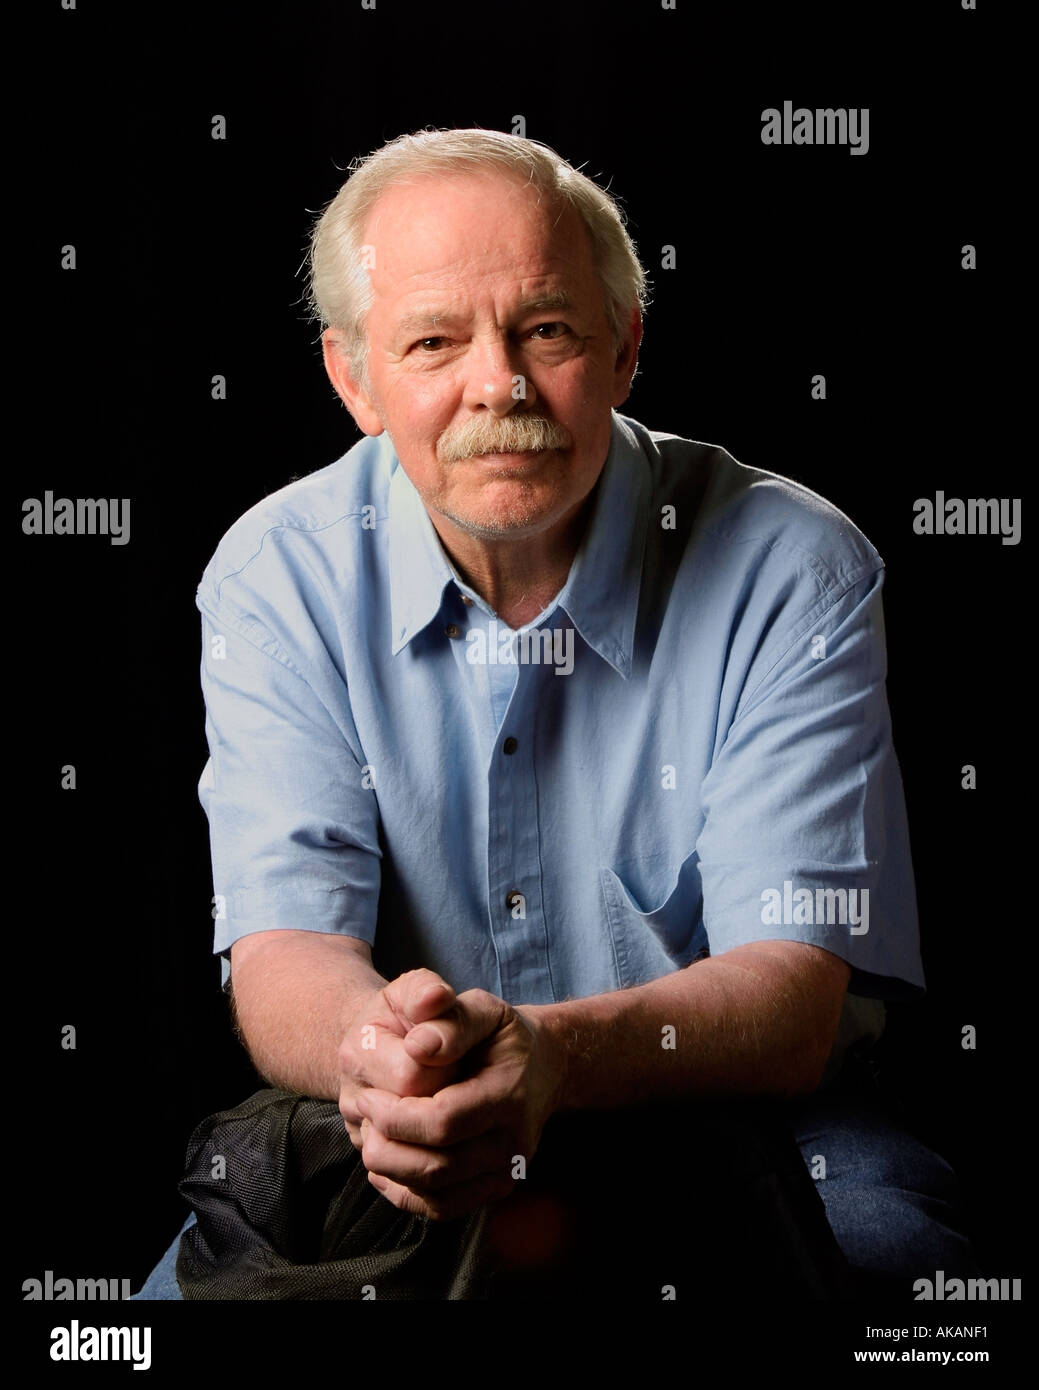 Rugged looking older man Stock Photo